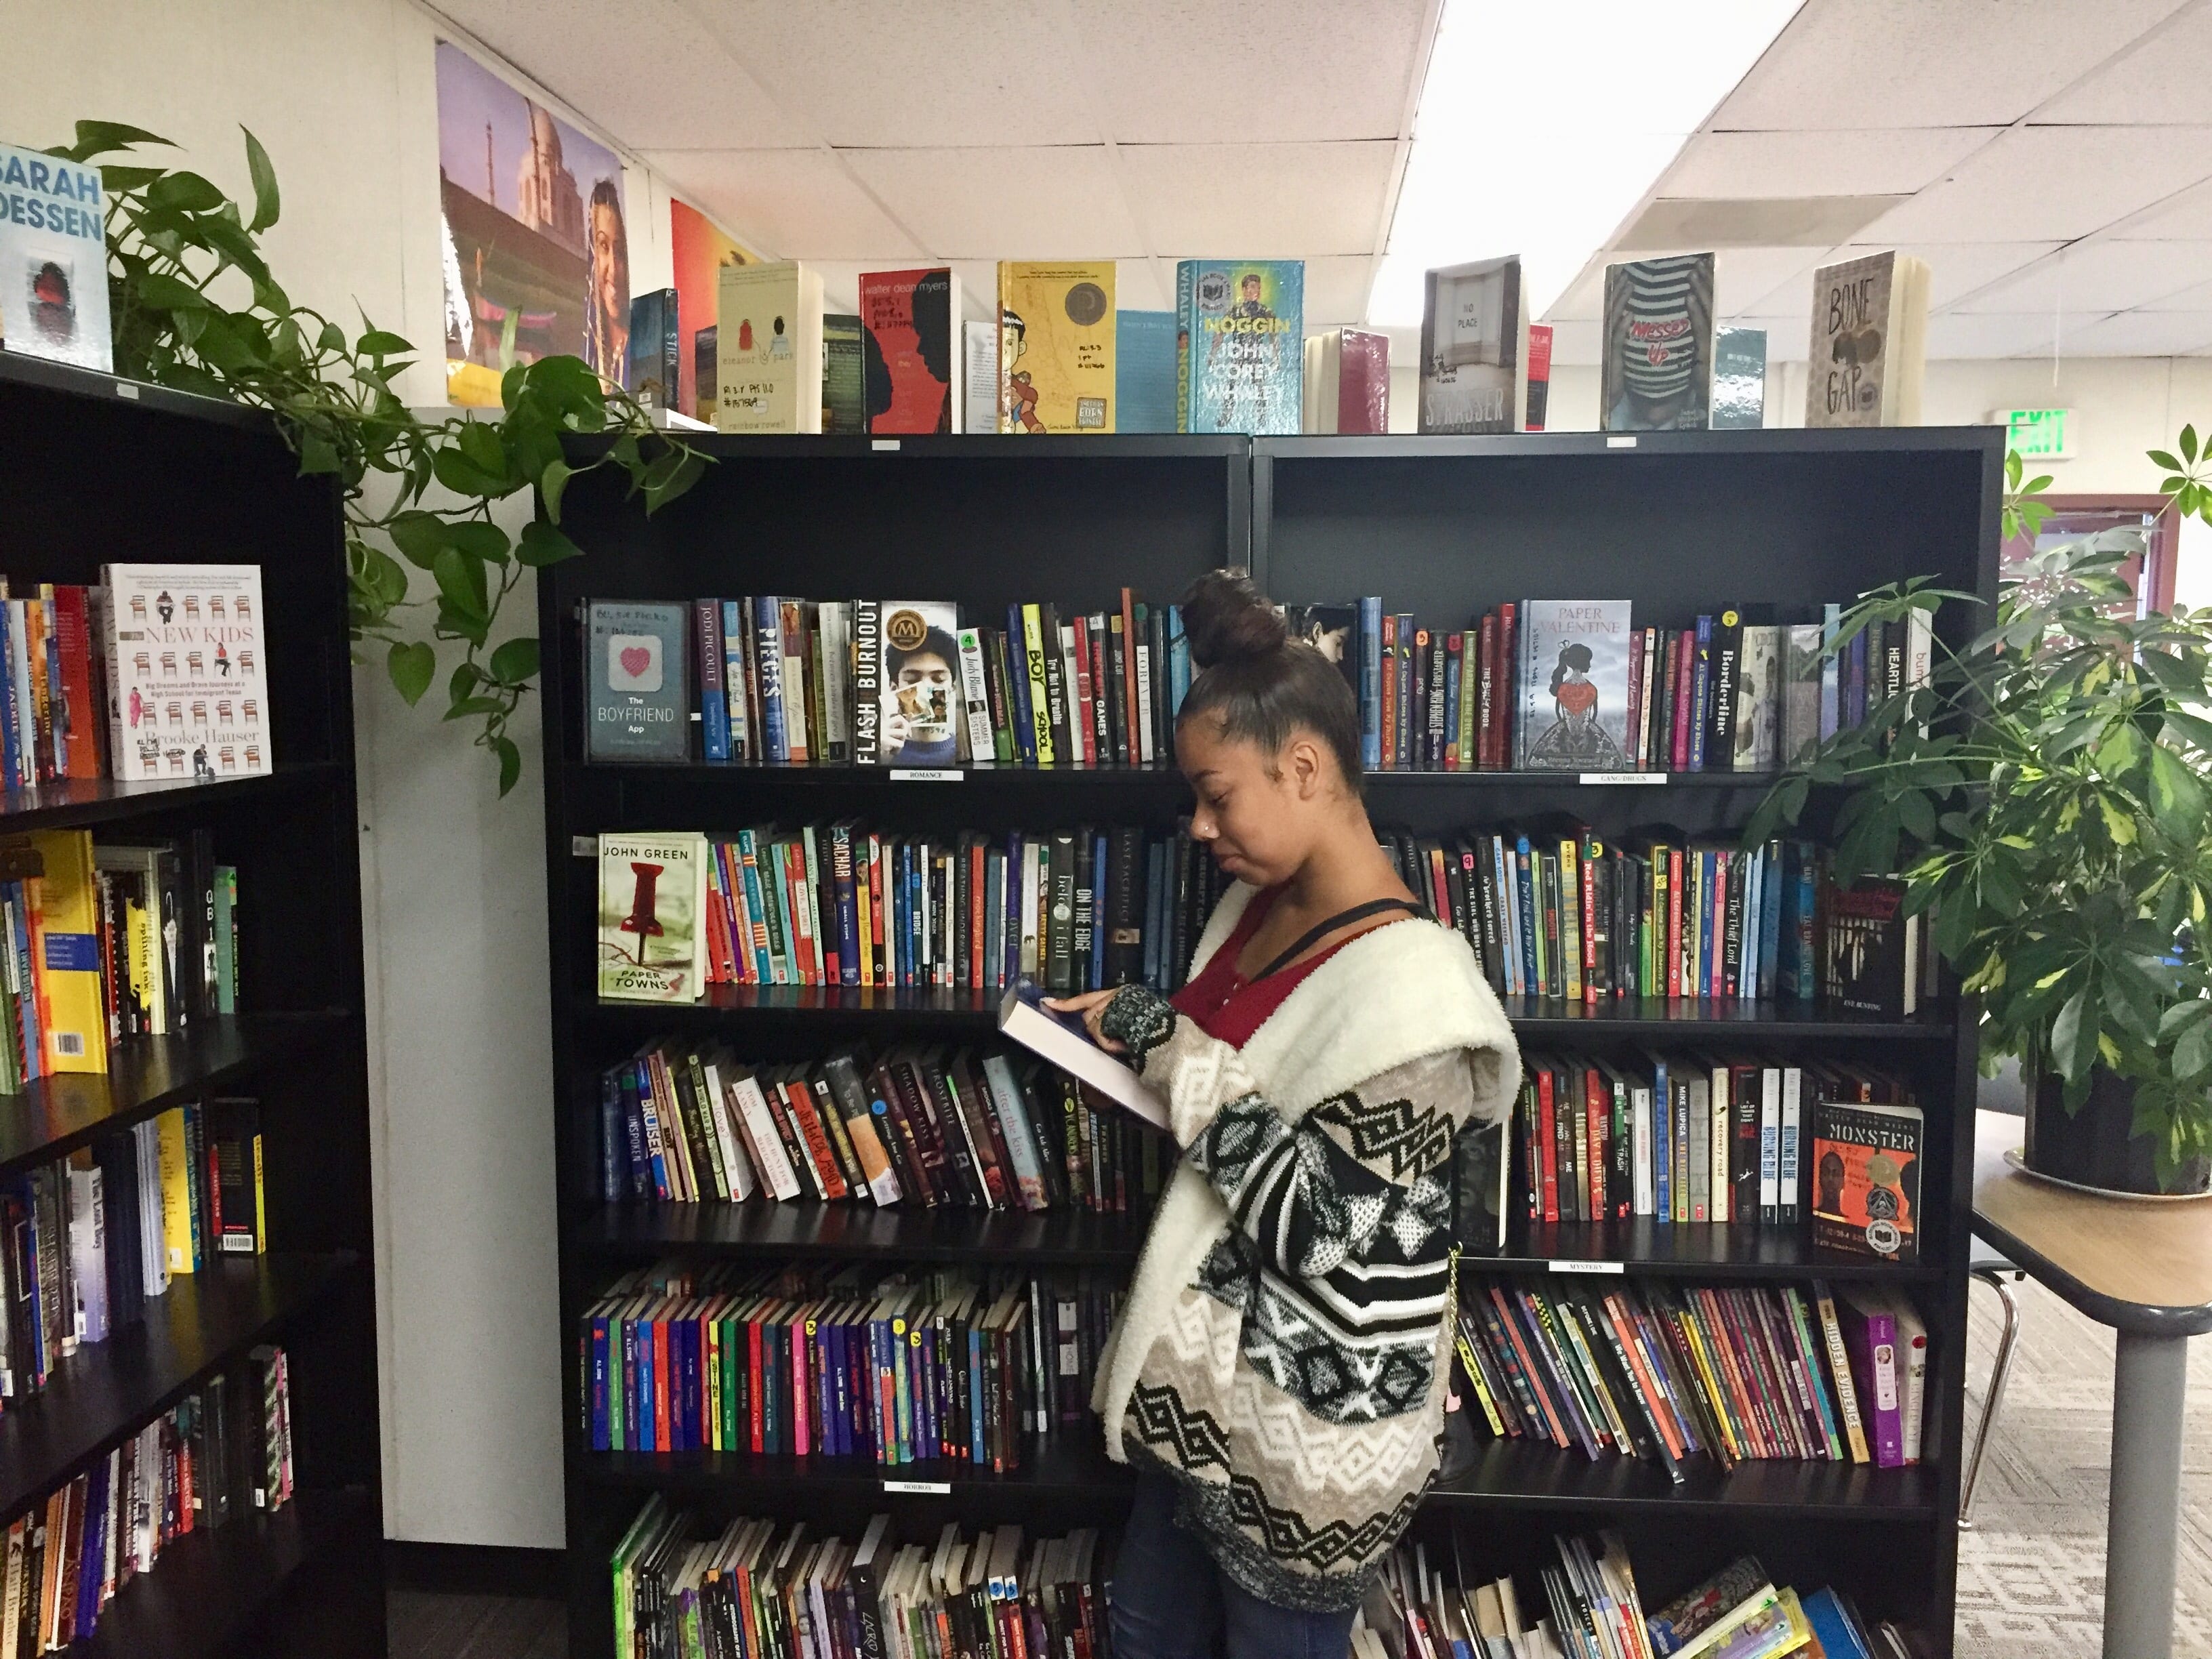 Student standing in front of bookshelves reading a book - help struggling readers